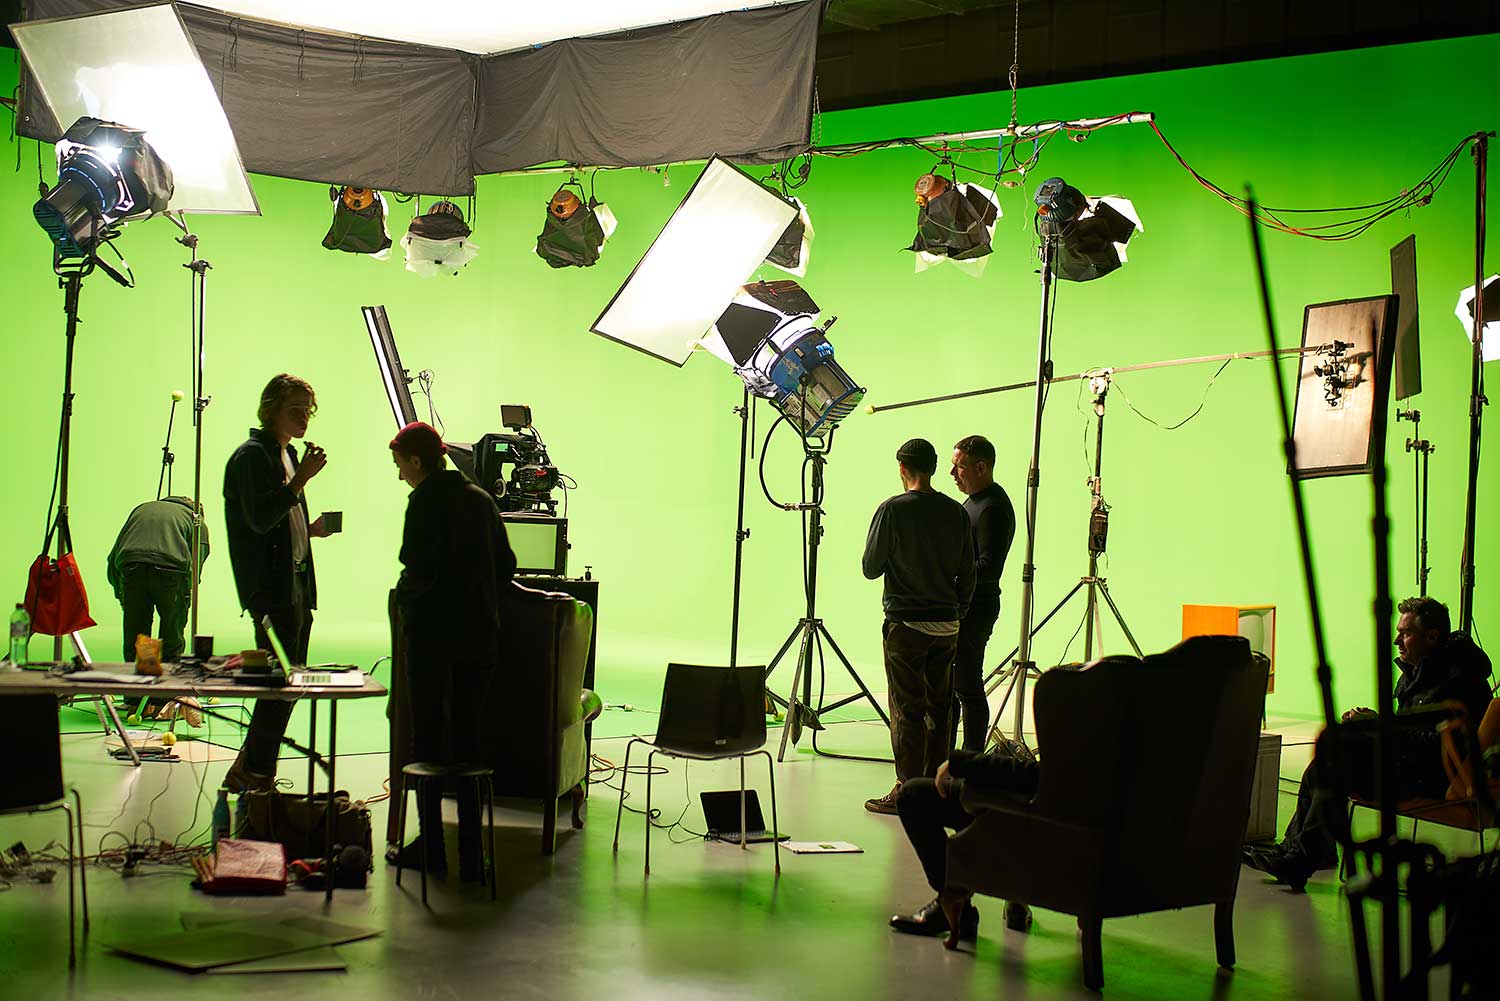 Film crew on set with equipment in front of a green screen